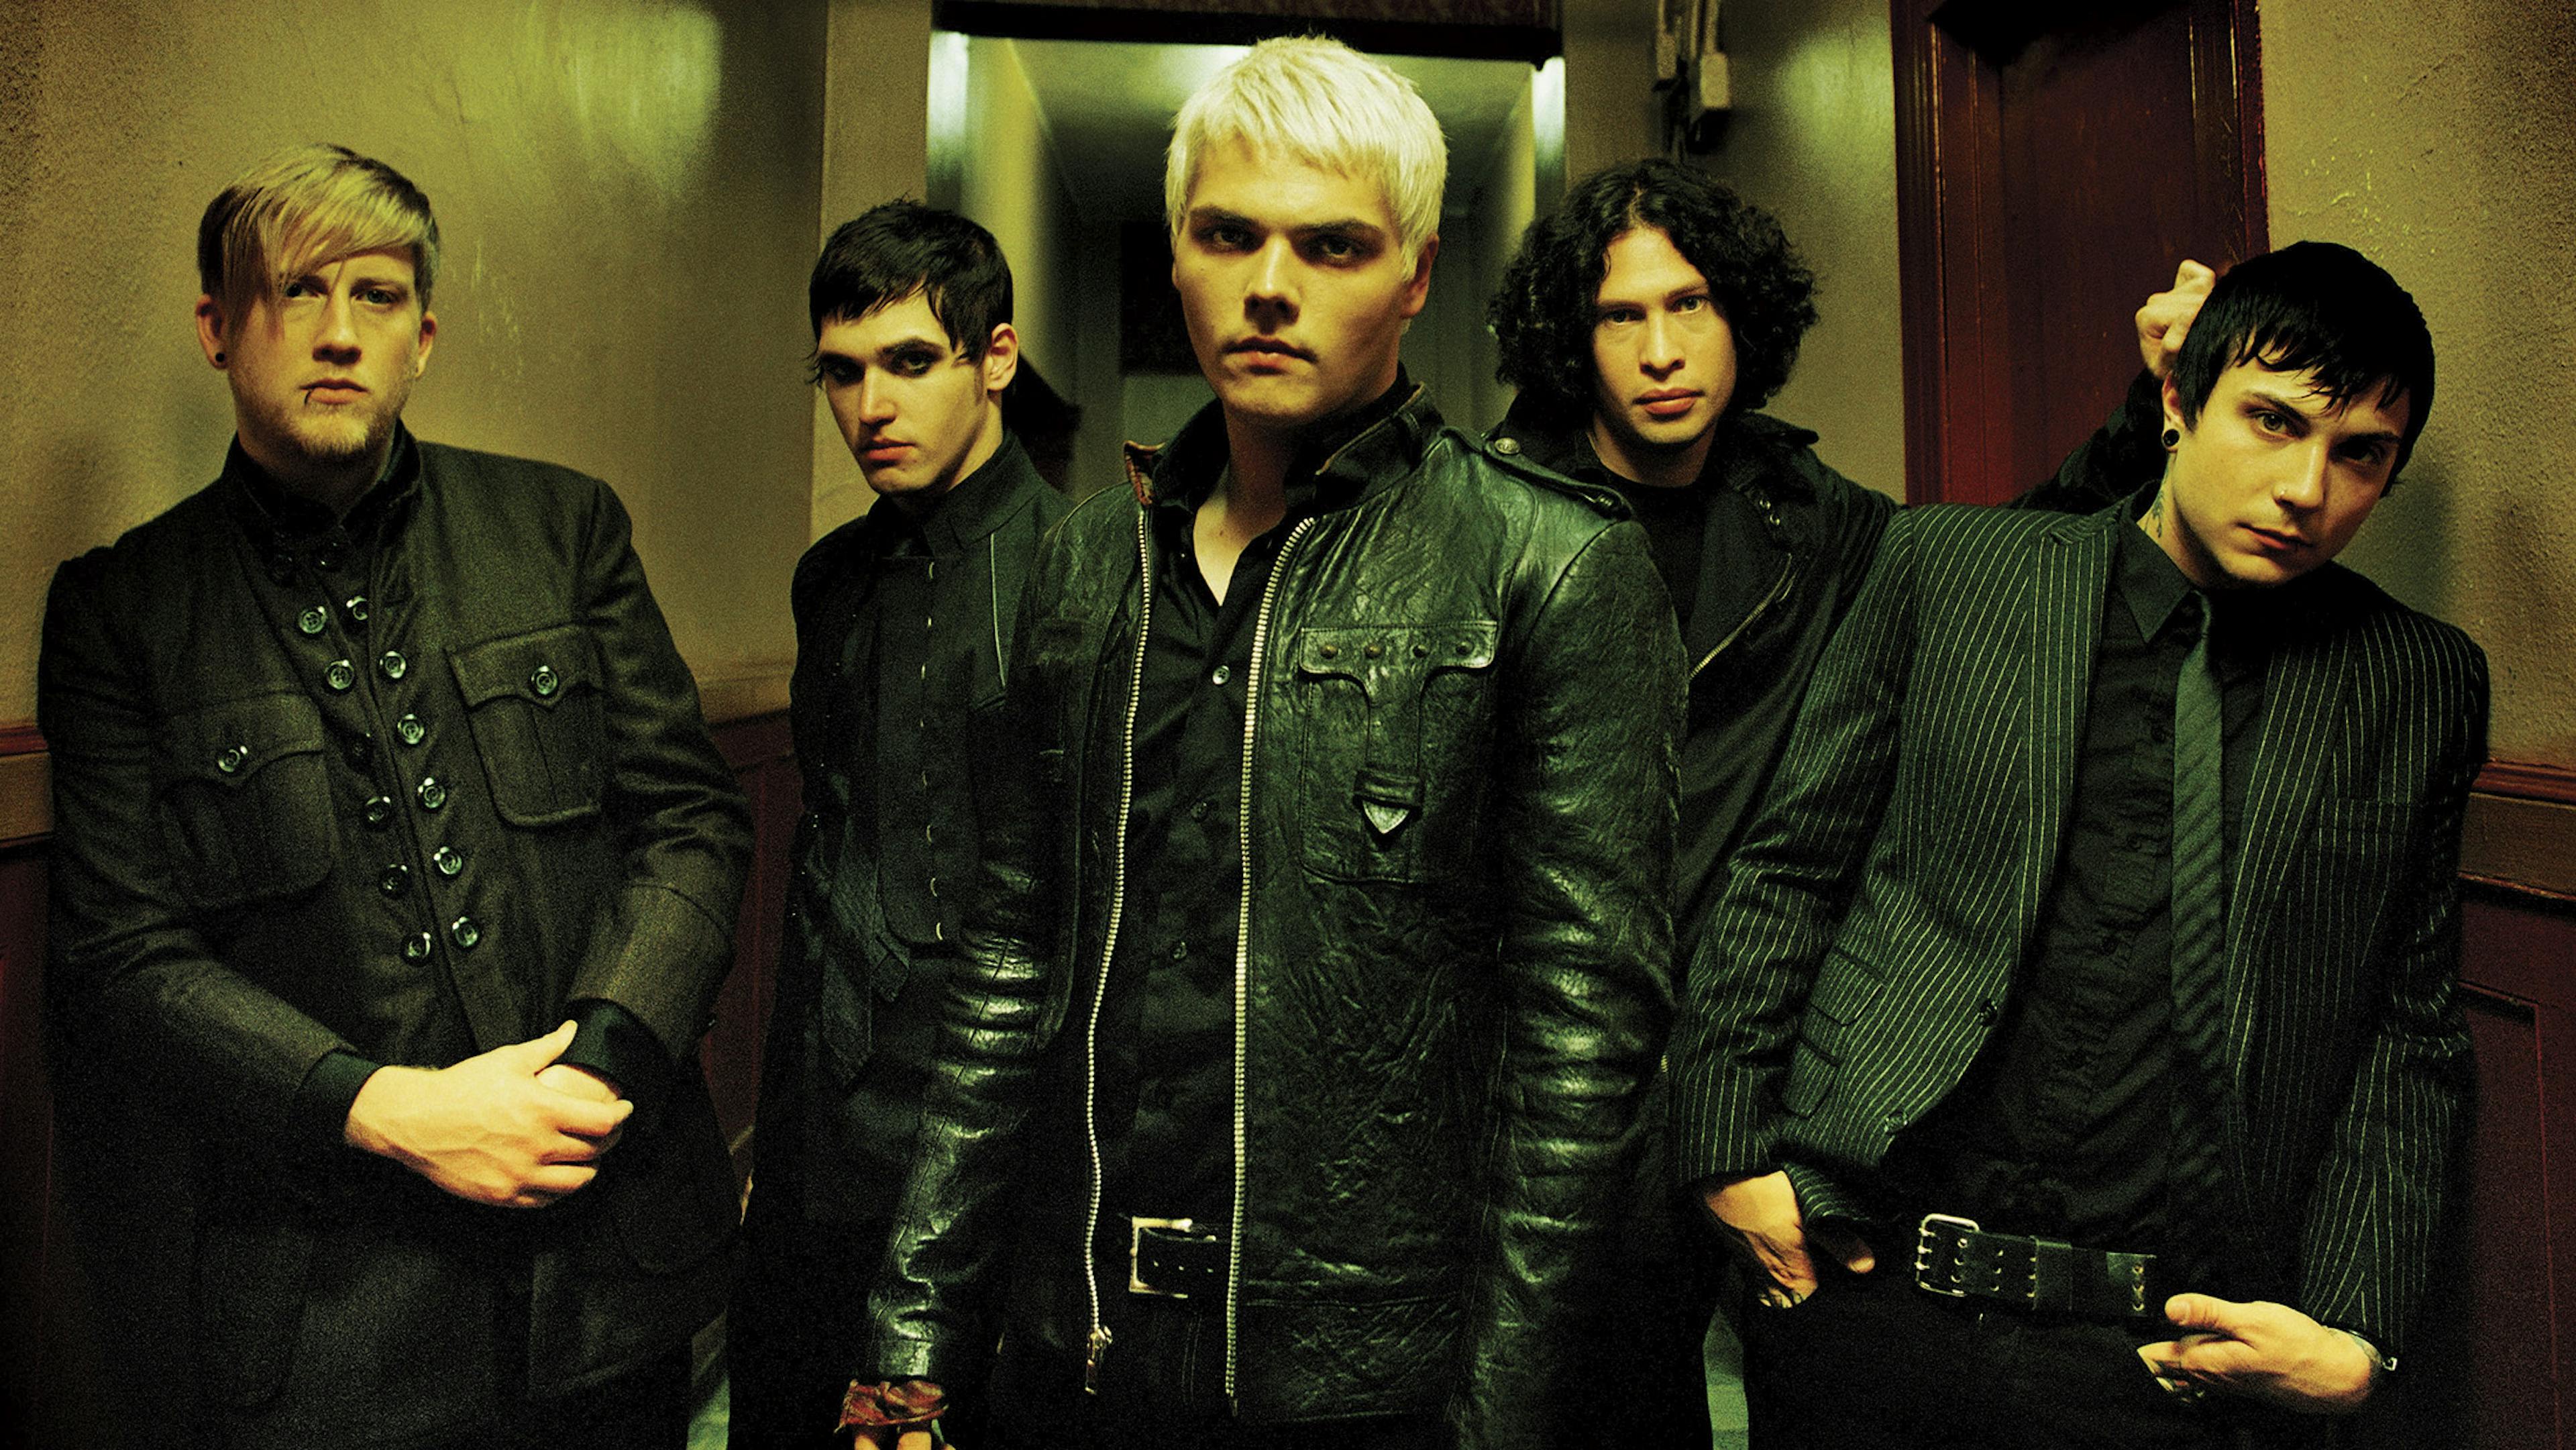 Why My Chemical Romance’s American Tour Is Good For Rock Music